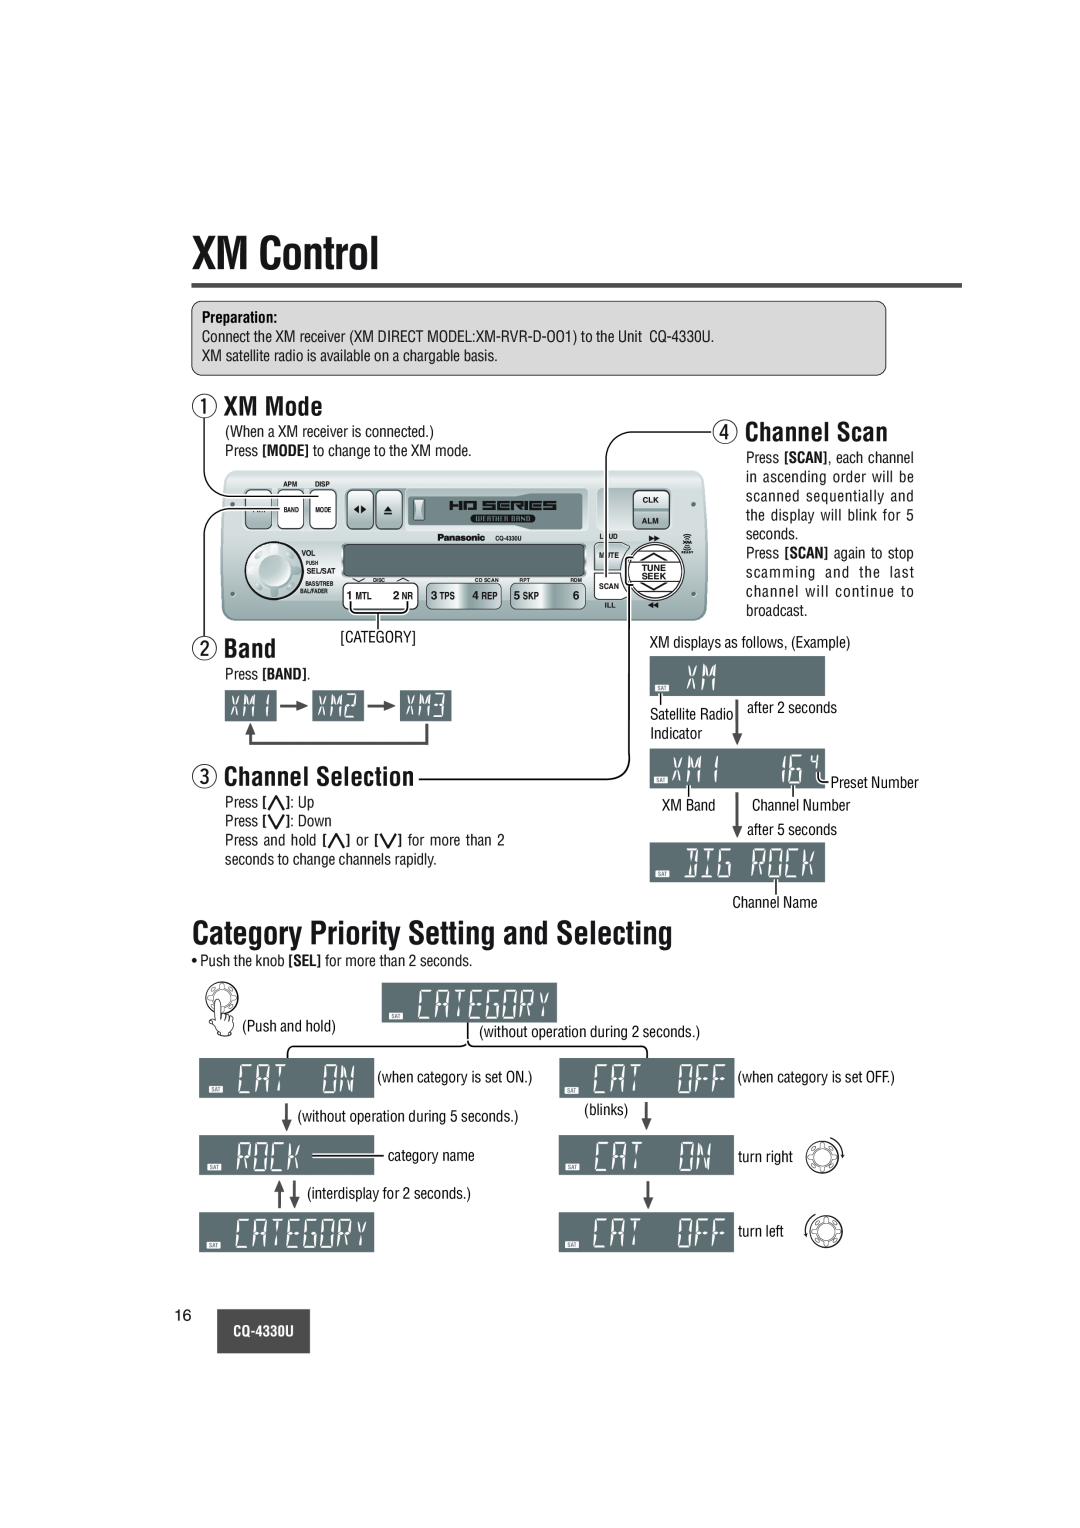 Panasonic CQ-4330U XM Control, Category Priority Setting and Selecting, q XM Mode, r Channel Scan, w Band, Preparation 